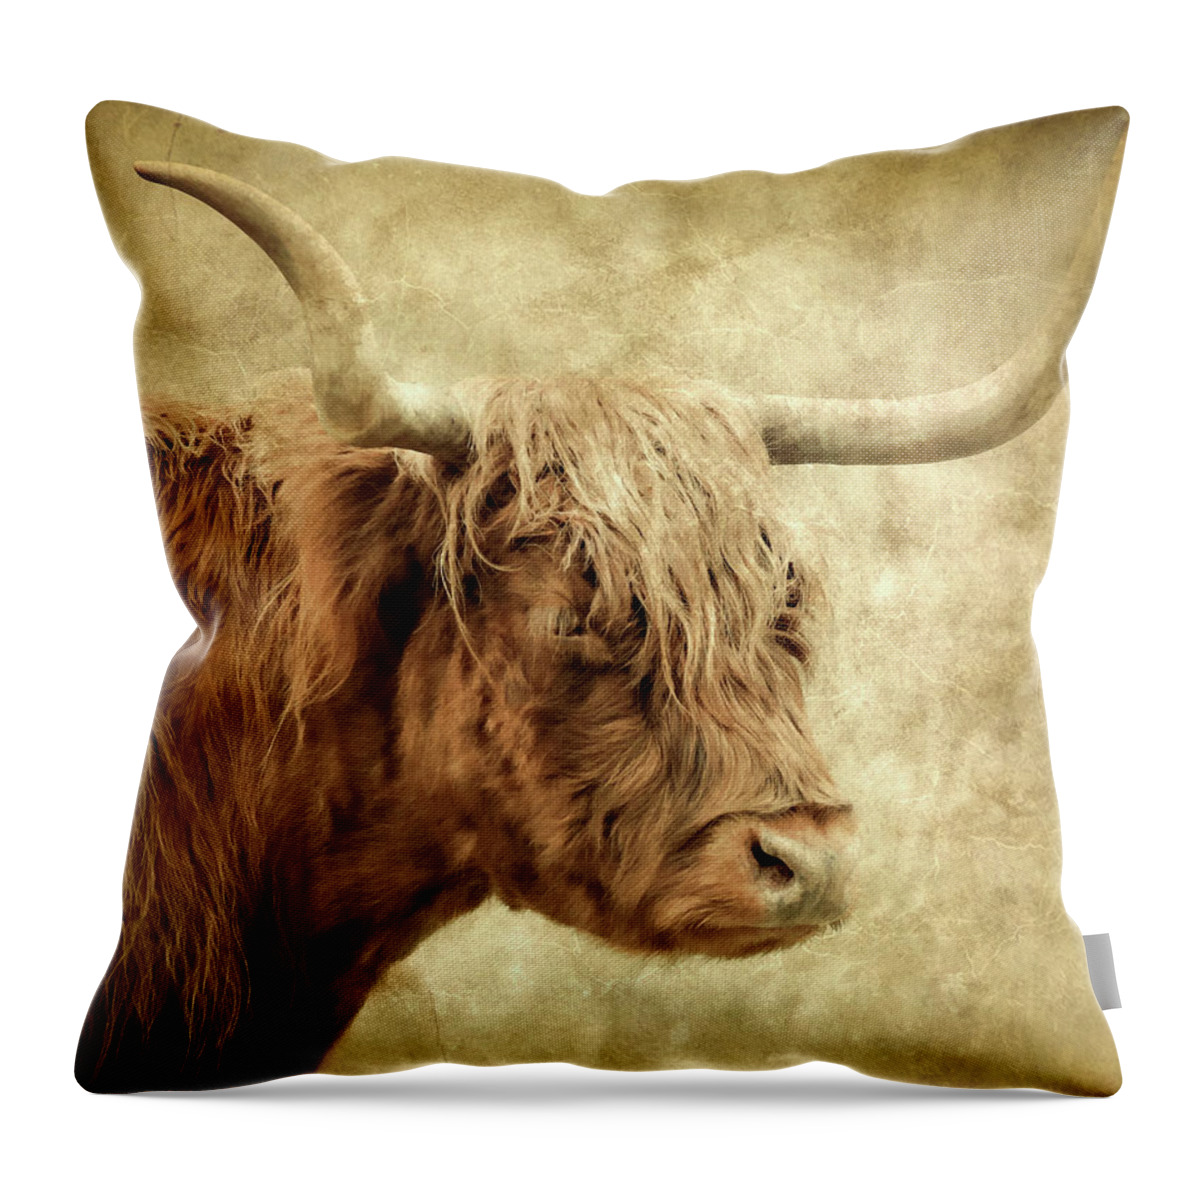 Highland Cow Throw Pillow featuring the photograph Highland Cow Paint by Athena Mckinzie